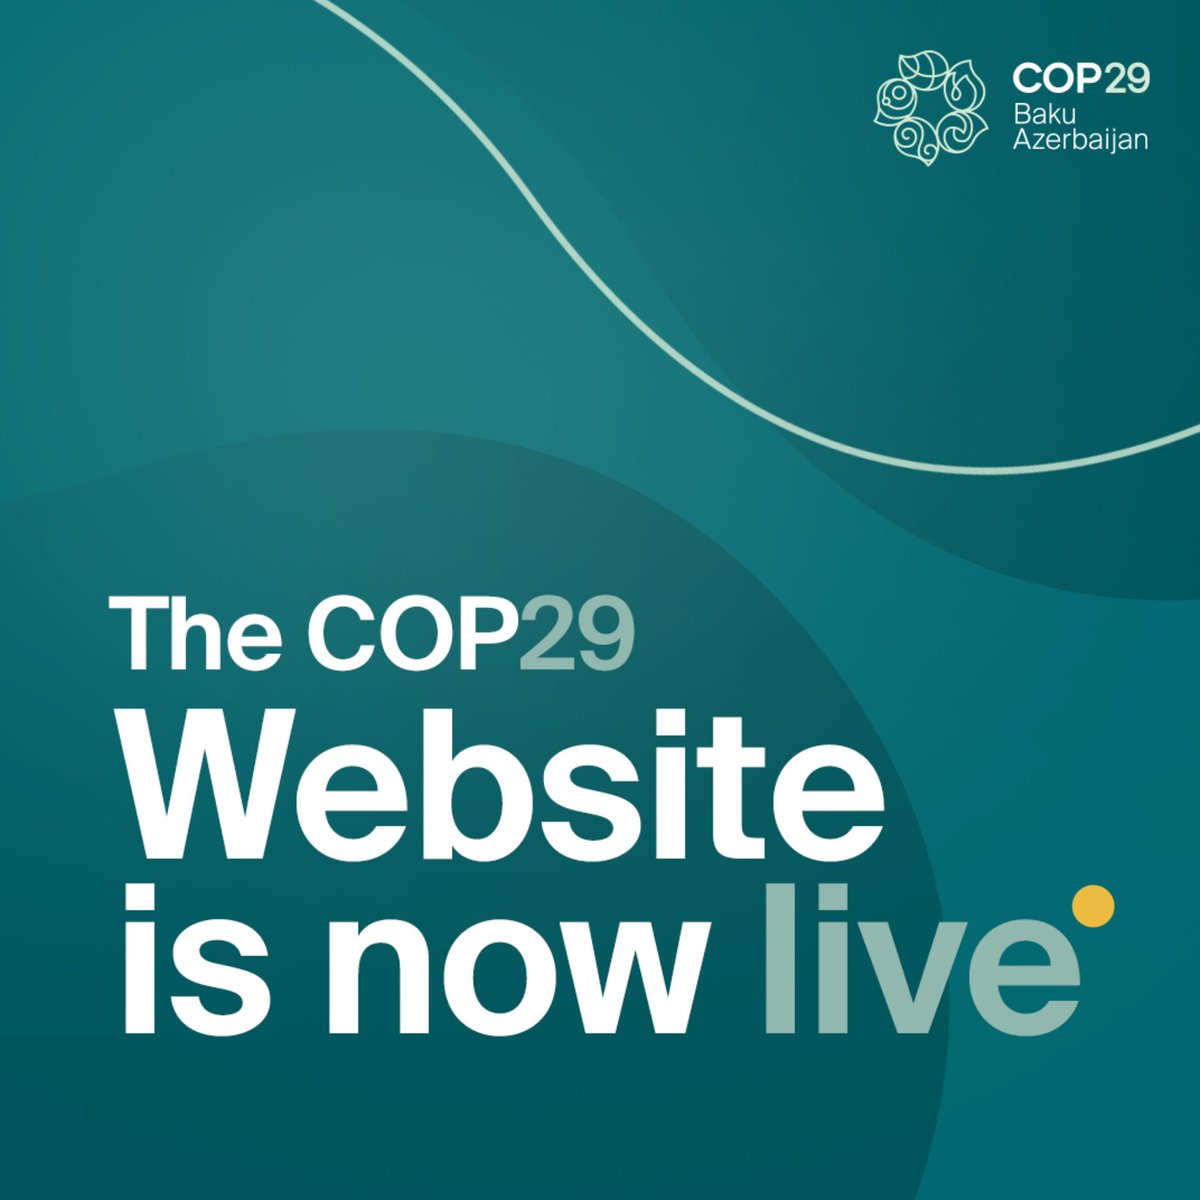 🇬🇧 The #COP29 Presidency has launched its official website!
Visit the website for the latest news from the COP29 Presidency, FAQs on the summit itself, and more information on how we are working in solidarity for a green world.
See for yourself at: cop29.az/en